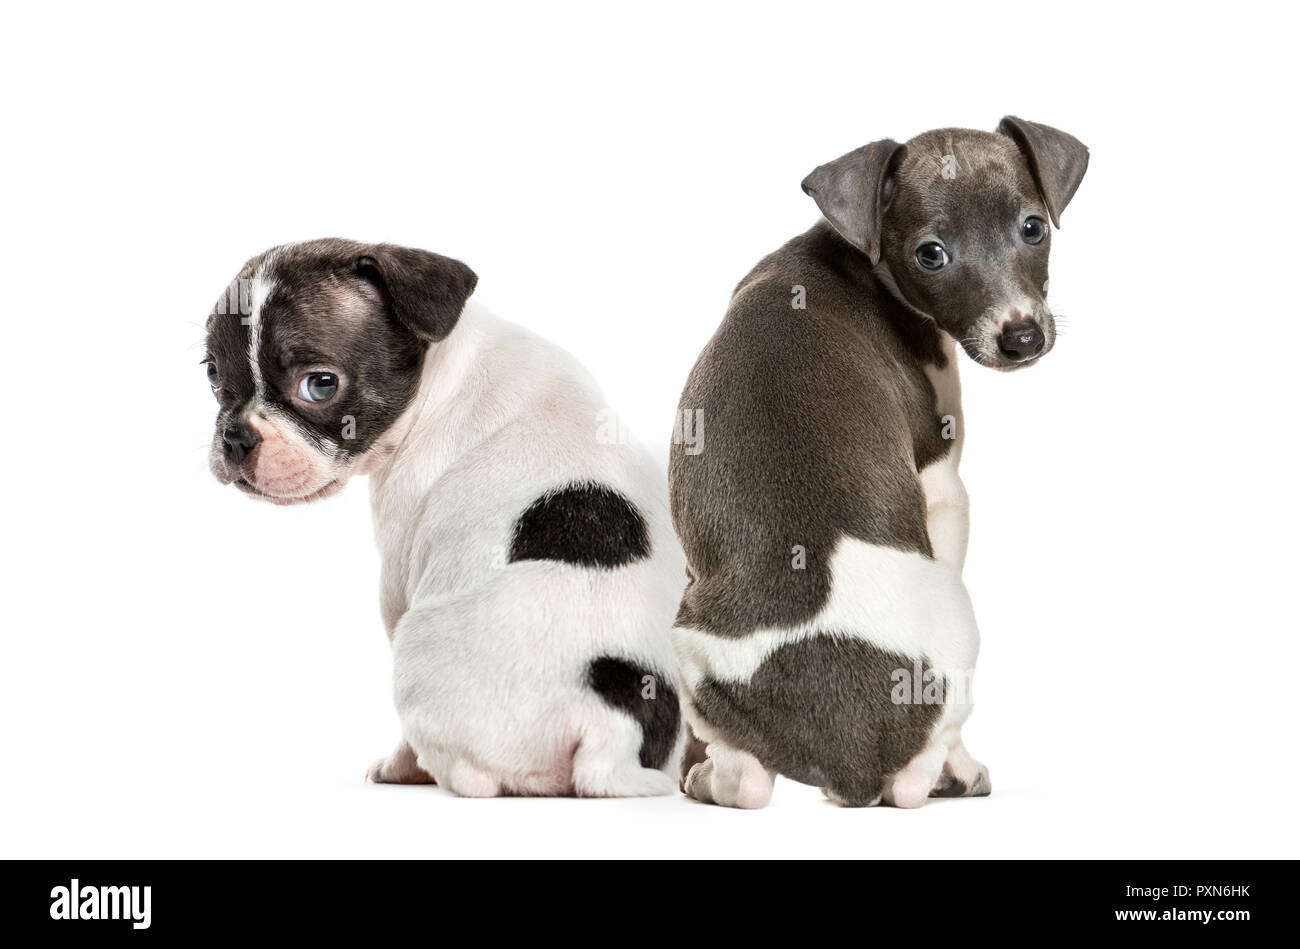 Boston terrier, chiot lévrier italien, in front of white background Banque D'Images